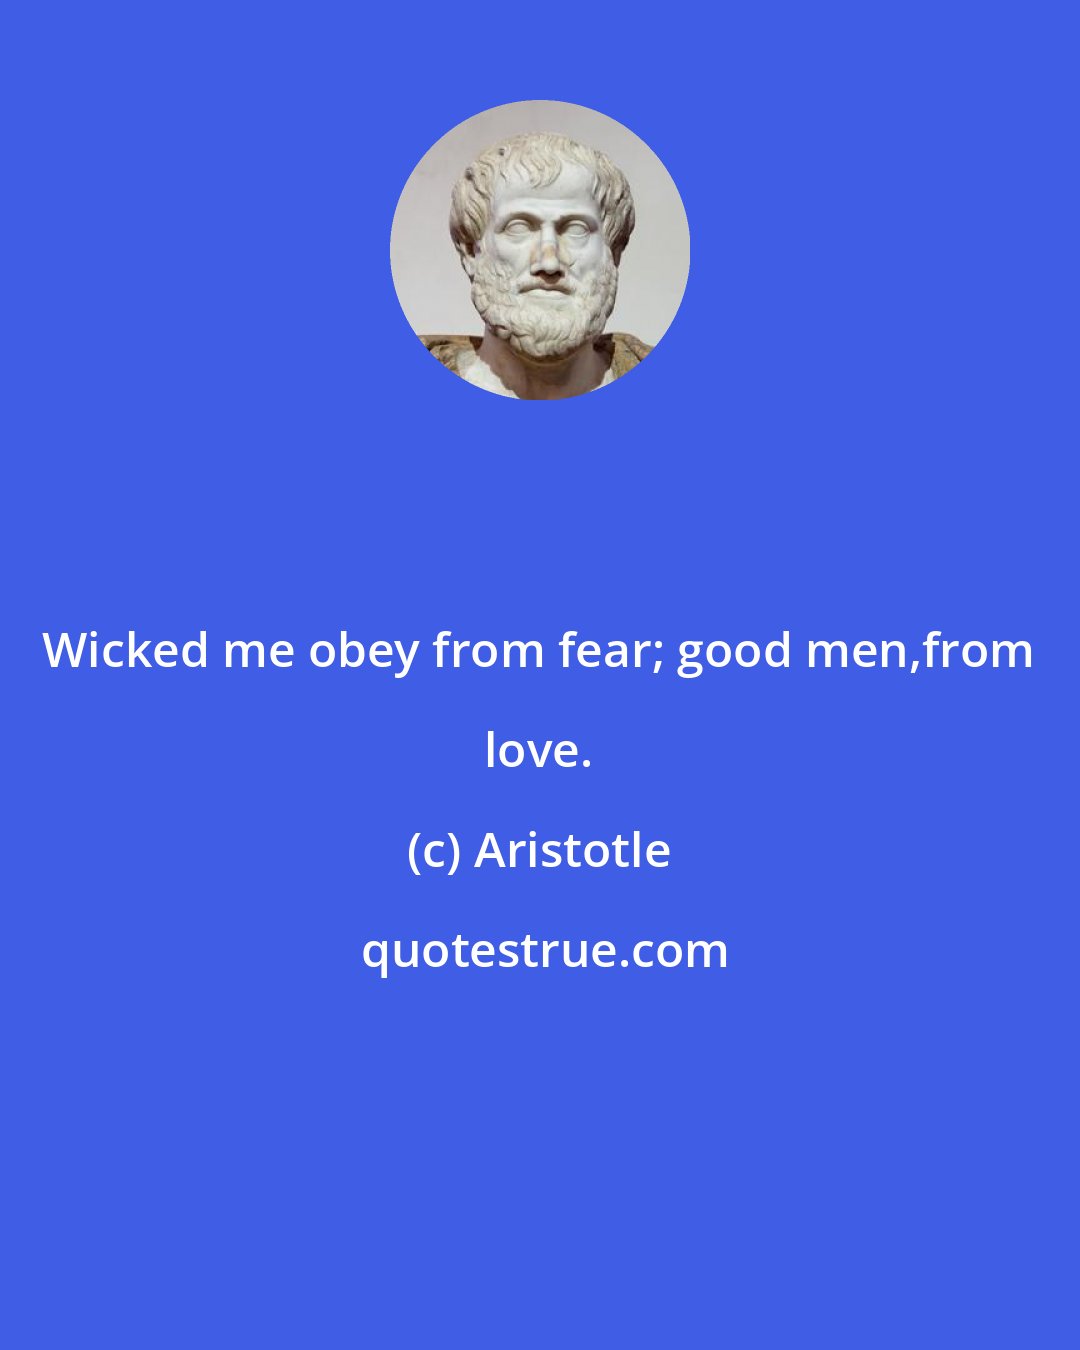 Aristotle: Wicked me obey from fear; good men,from love.